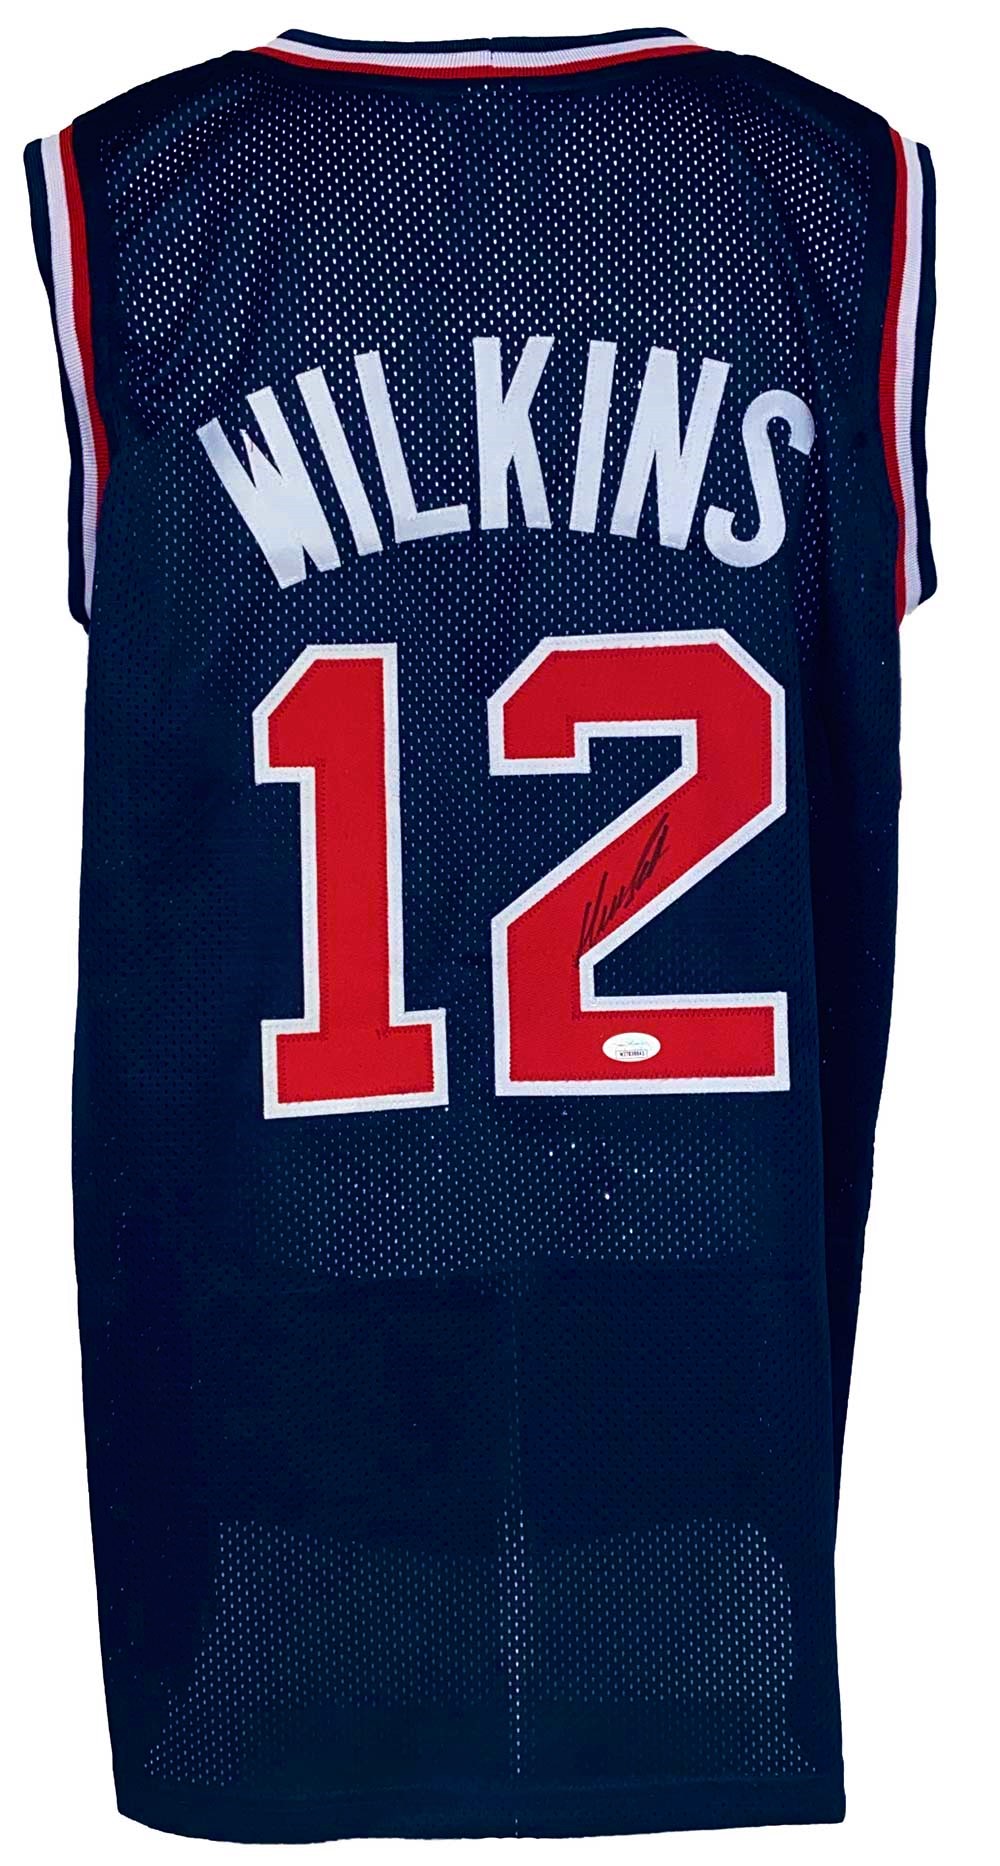 Dominique Wilkins Autographed Pro Style Team USA Jersey JSA Authenticated